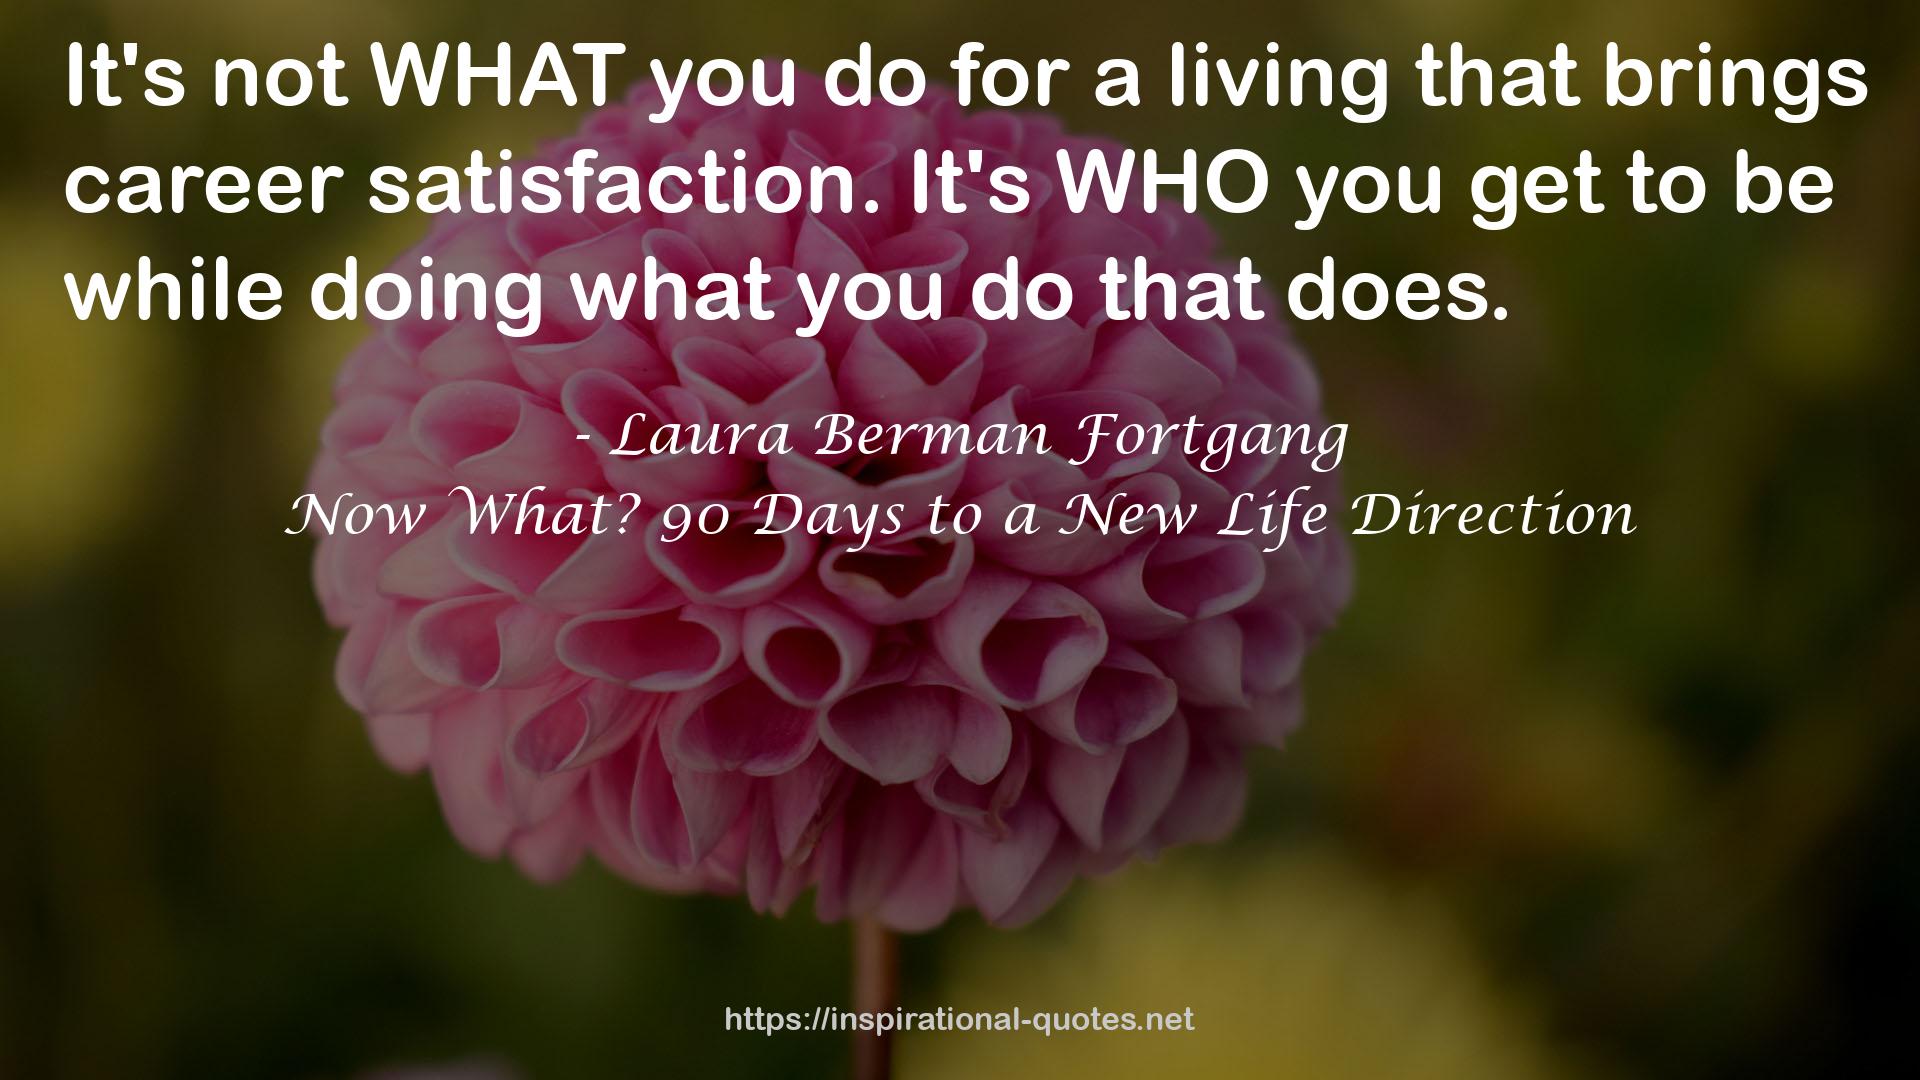 Now What? 90 Days to a New Life Direction QUOTES